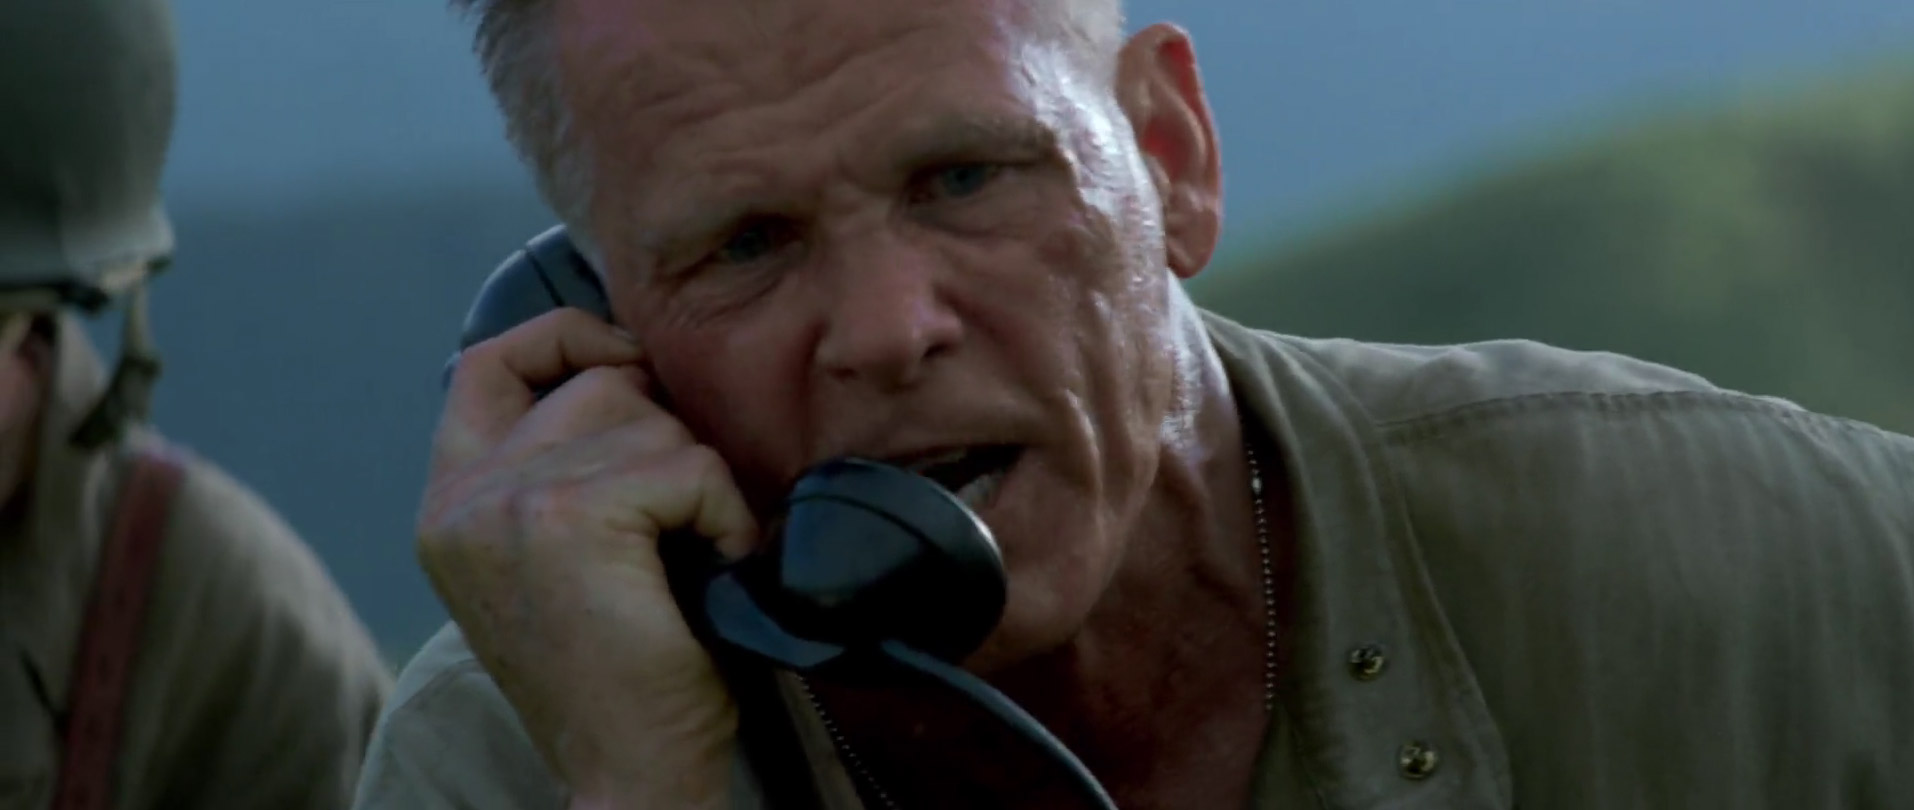 Nick Nolte in The Thin Red Line